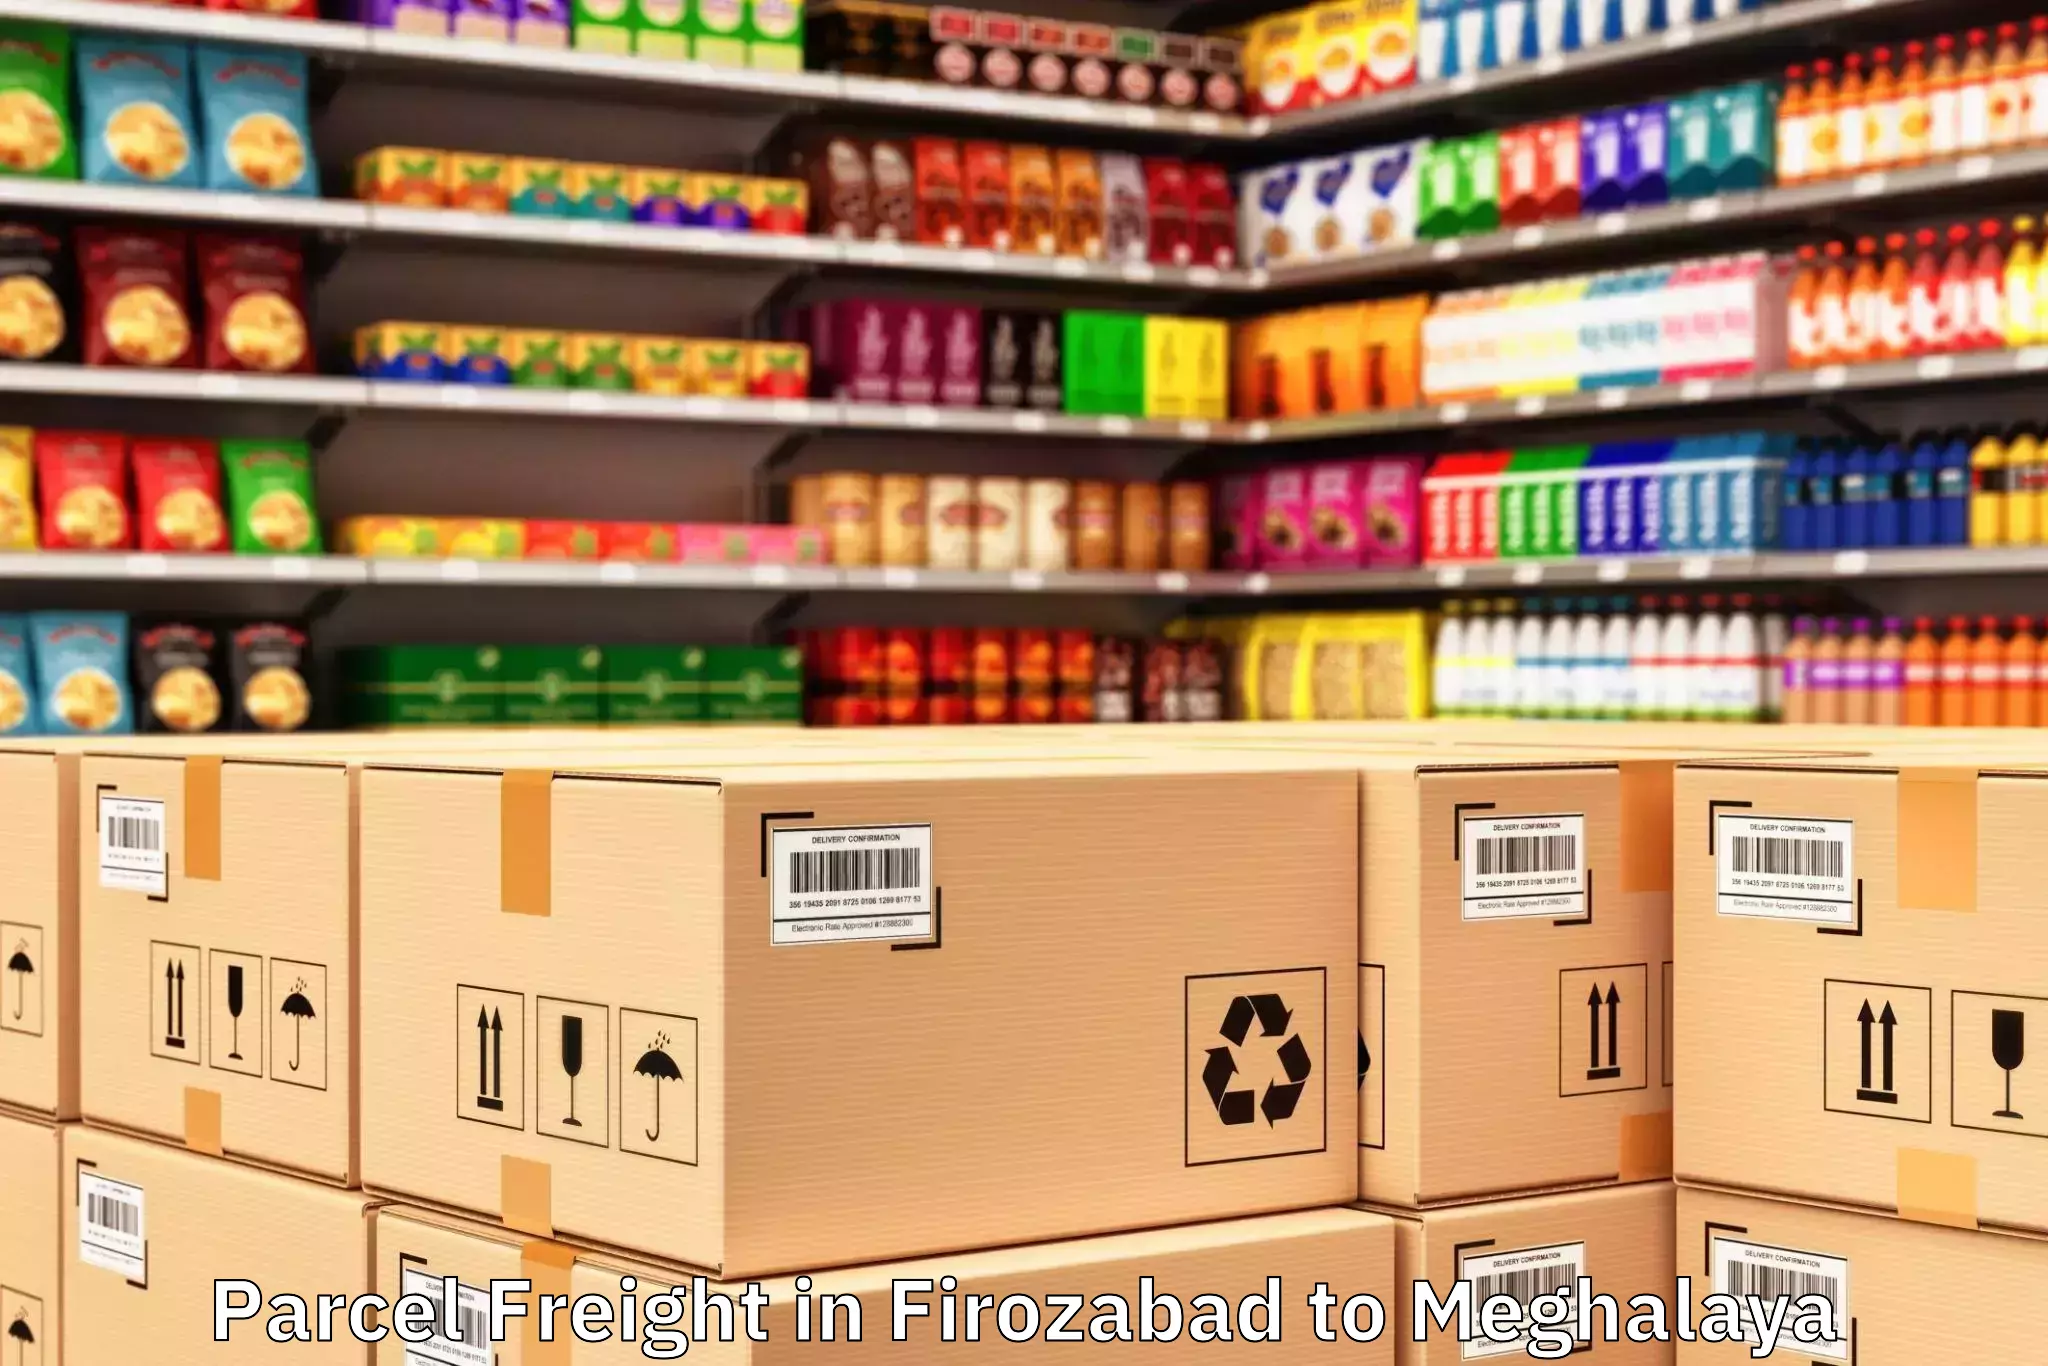 Top Firozabad to Shella Bholaganj Parcel Freight Available